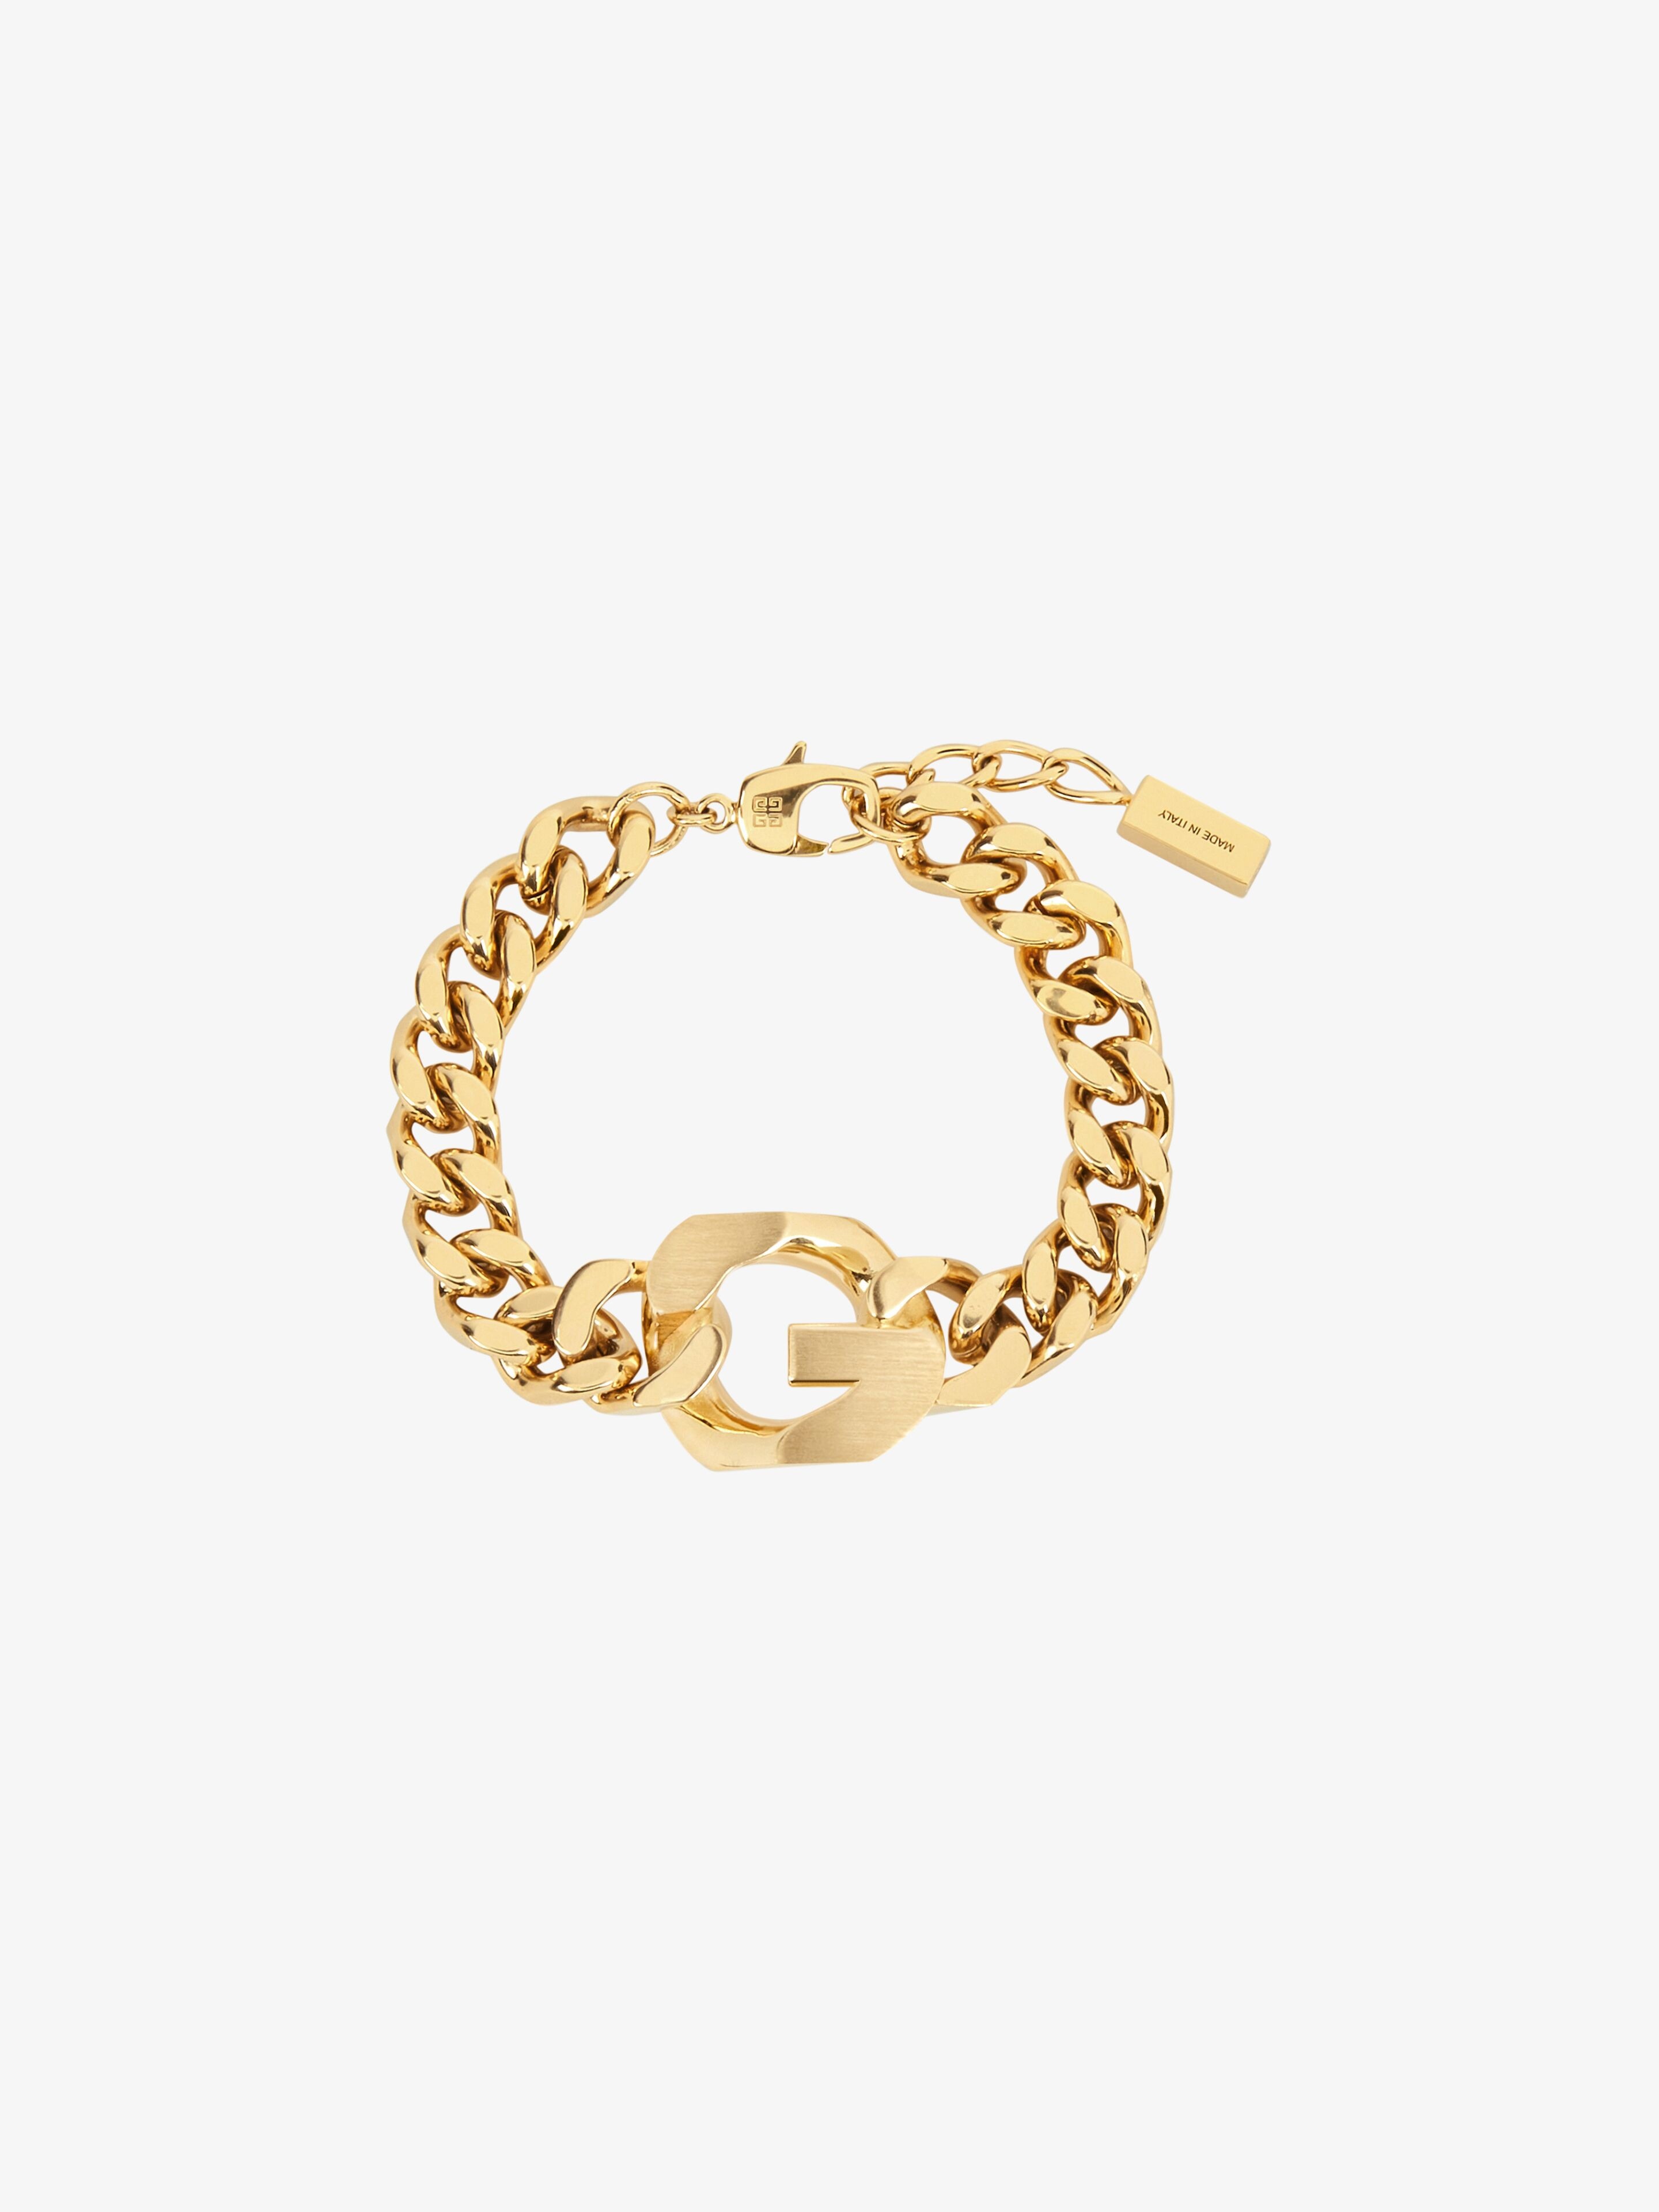 Givenchy Women's G Chain Bracelet In Metal In Multicolor